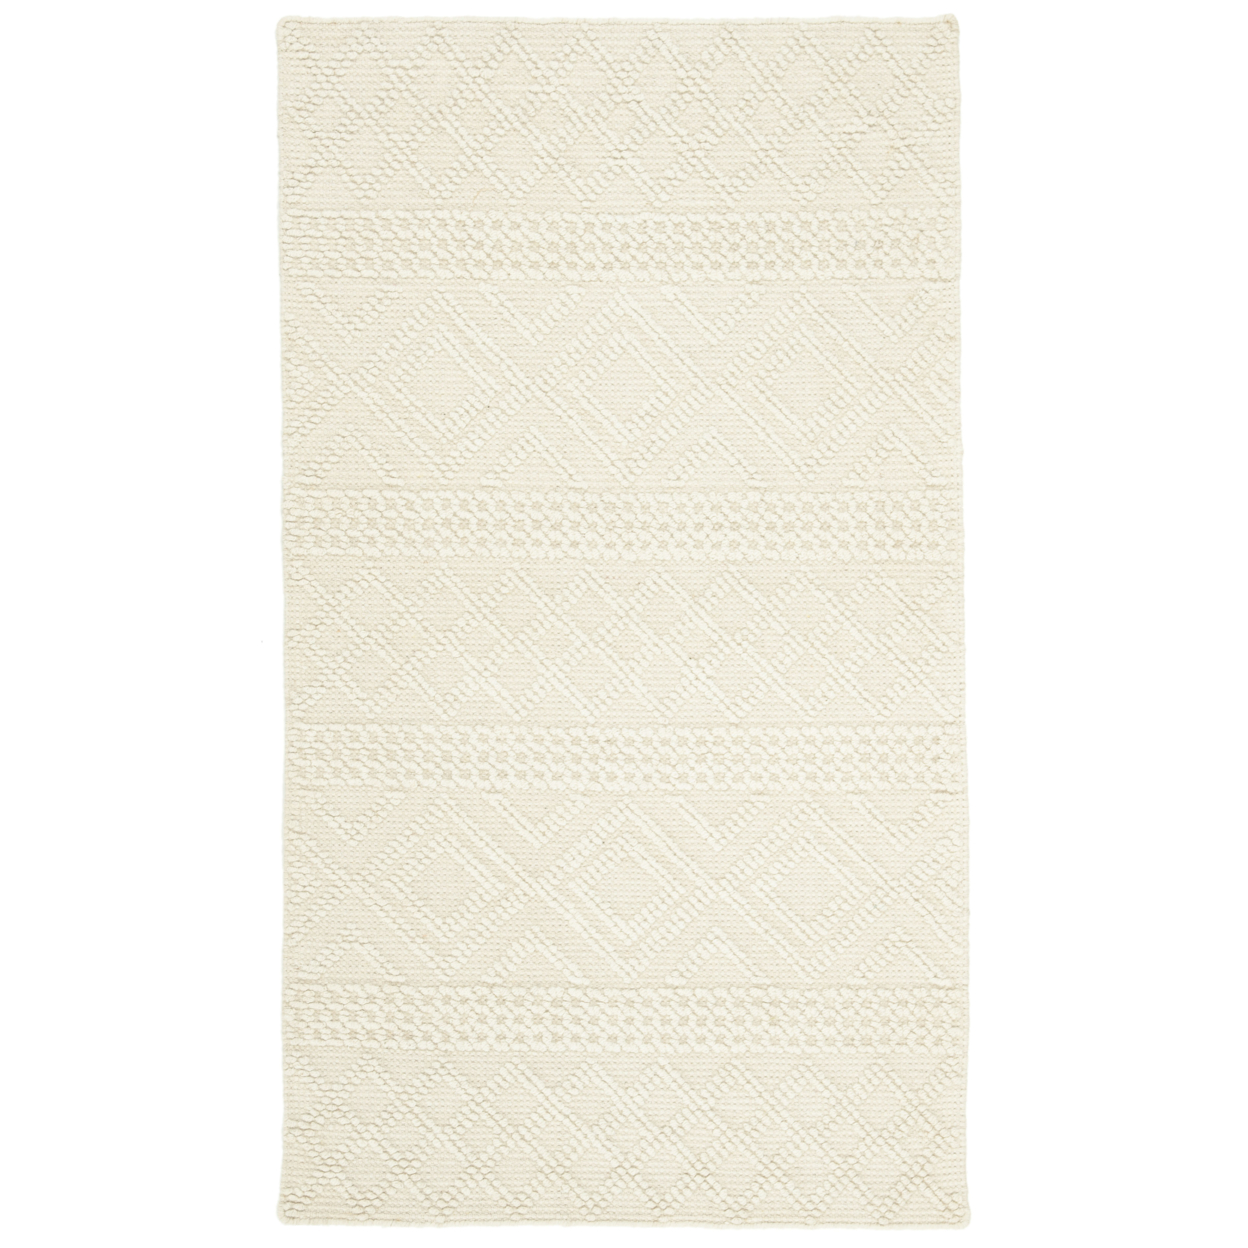 SAFAVIEH Vermont Collection VRM211A Handwoven Ivory Rug - 8' Square